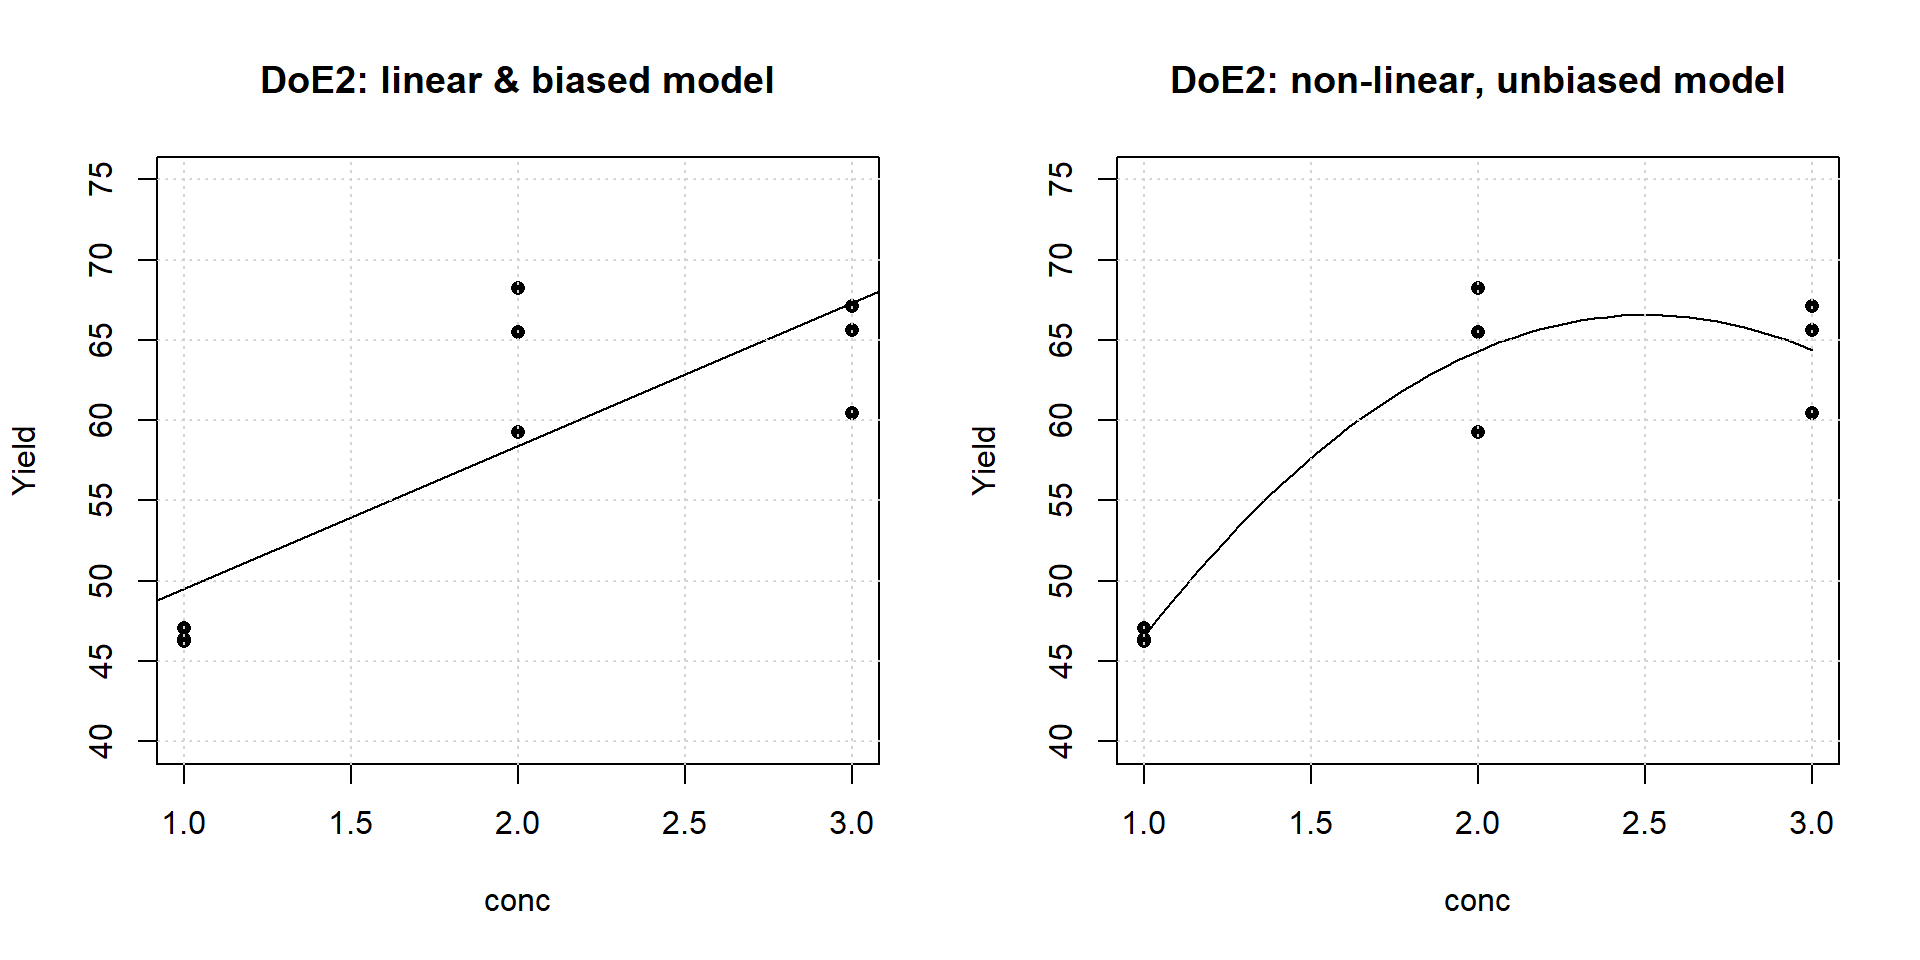 Linear biased and non-linear unbiased models of the design DoE2